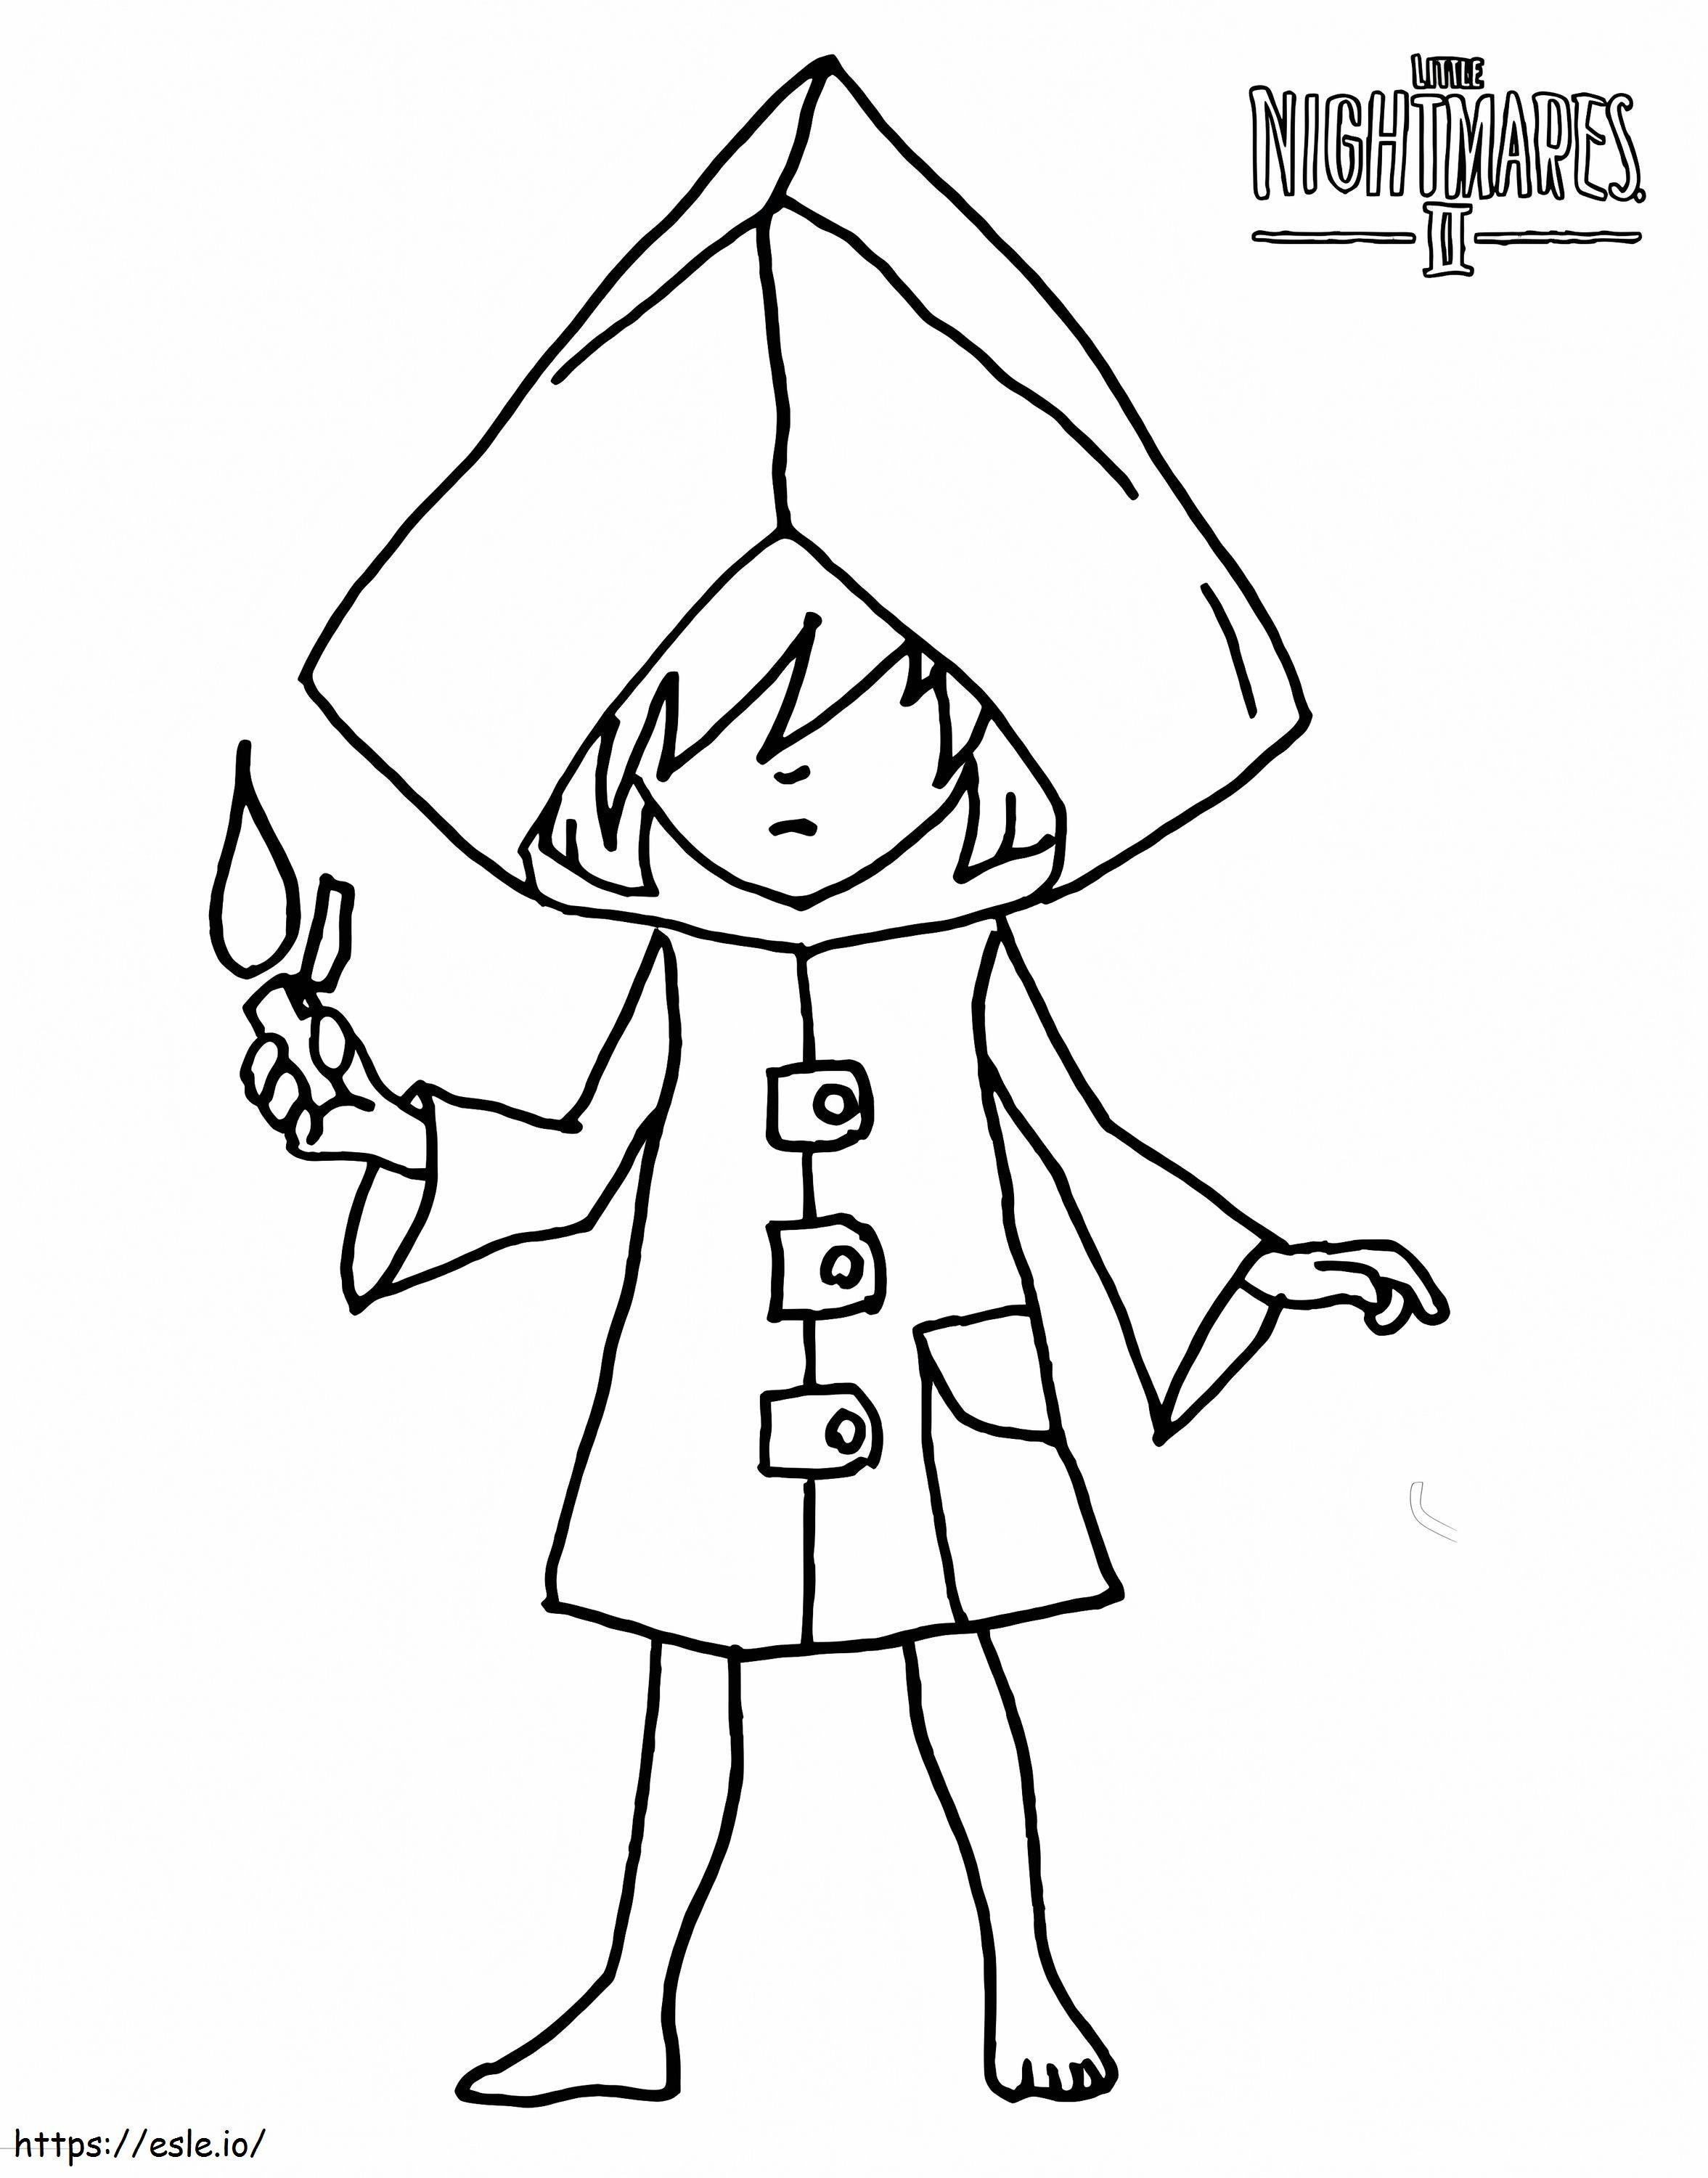 Little Nightmares Six coloring page